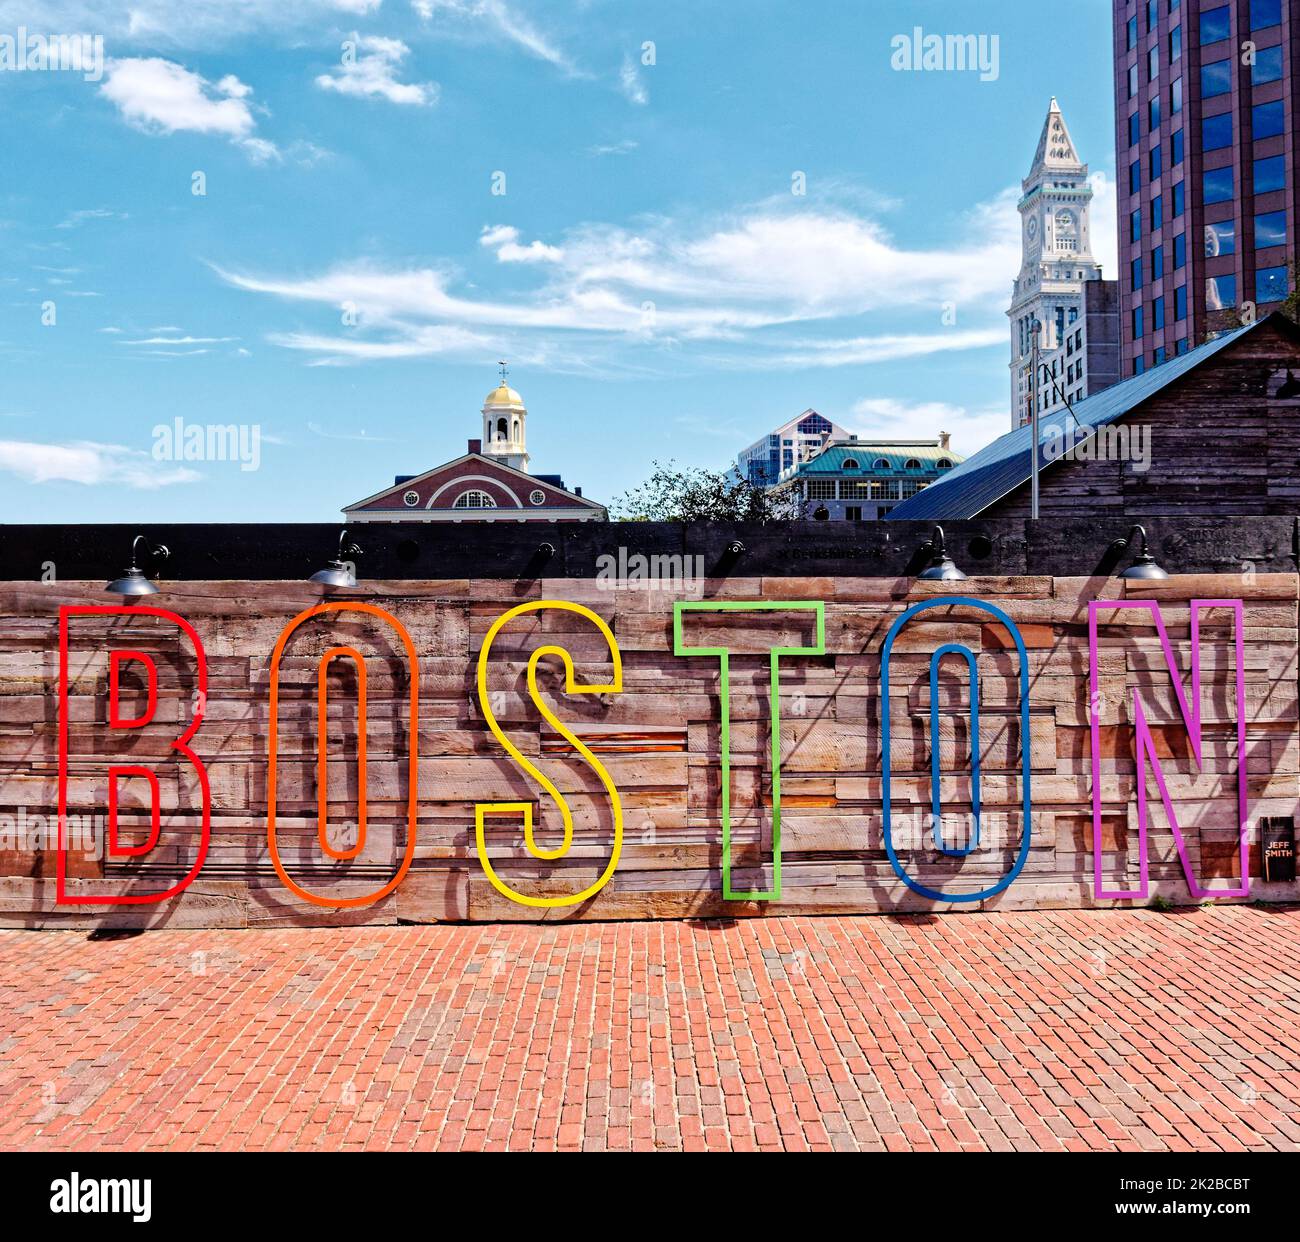 BOSTON, MASSACHUSETTS - August 29, 2022: Boston is one of the oldest cities in the States and is rich in history. This brings in a huge tourism indust Stock Photo